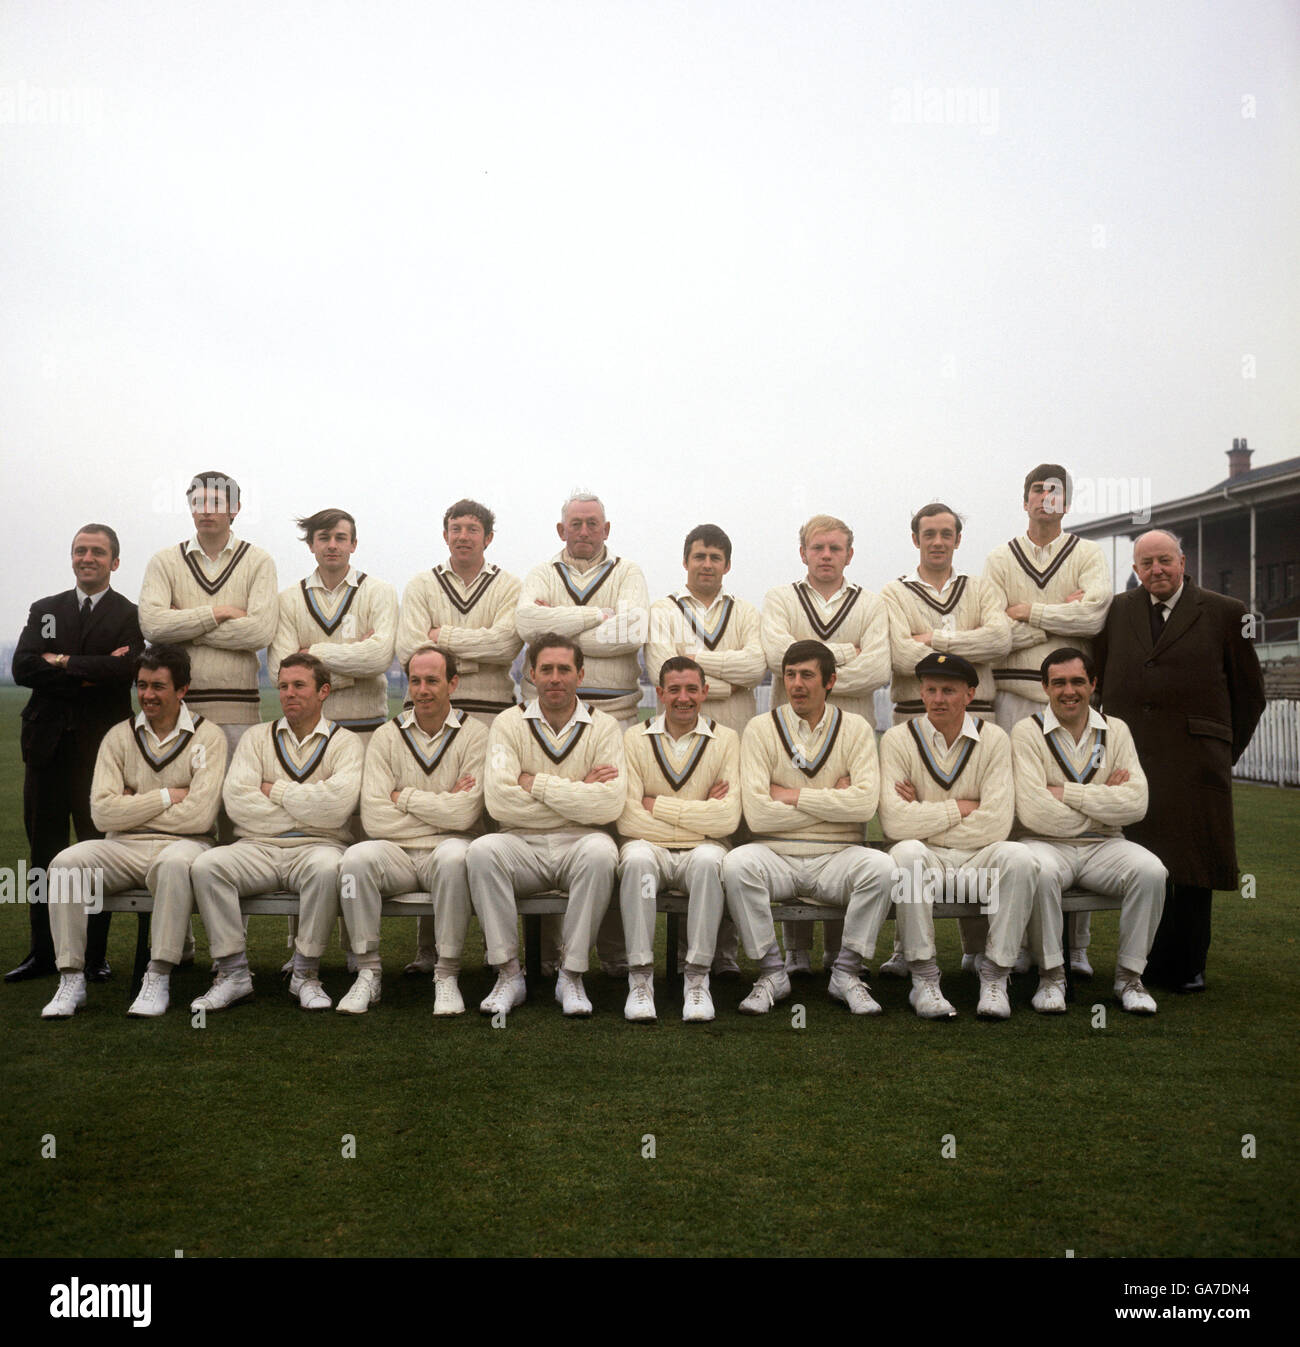 Derbyshhire County Cricket Club Back Row: Fred Allen (Trainer), Mike Hendrick, Peter Gibbs, Philip Russell, Dennis Smith (Coach), John Harvey, Fred Swarbrook, Chris Marks, Alan Ward, Gilbert Ryde Front Row: Bob Taylor (Wicket Keeper), Ian Hill, Ian Buxton, Derek Morgan (Capt), Edwin Smith, Mike Page, Peter Eyre, David Smith Stockfoto